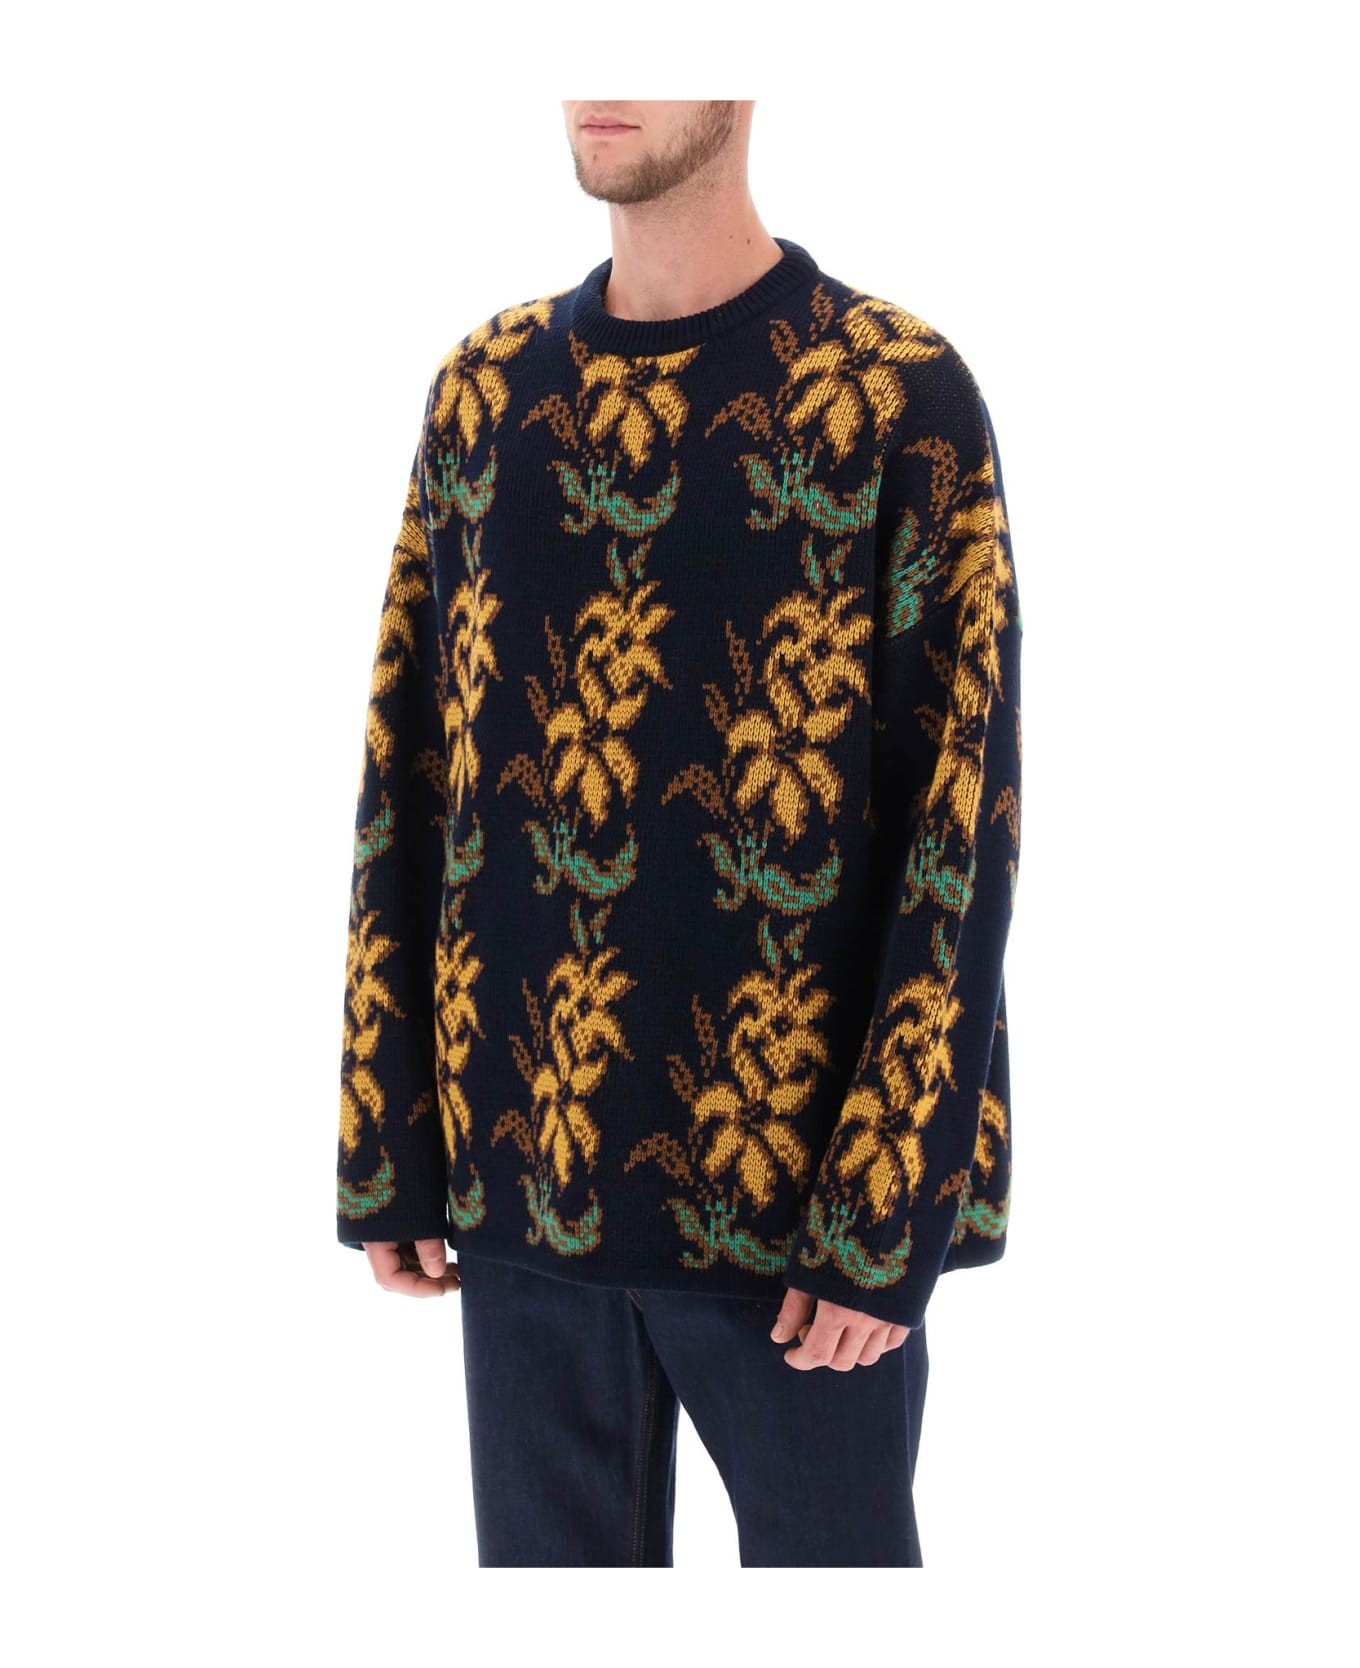 Etro Sweater With Floral Pattern - BLUE (Blue)